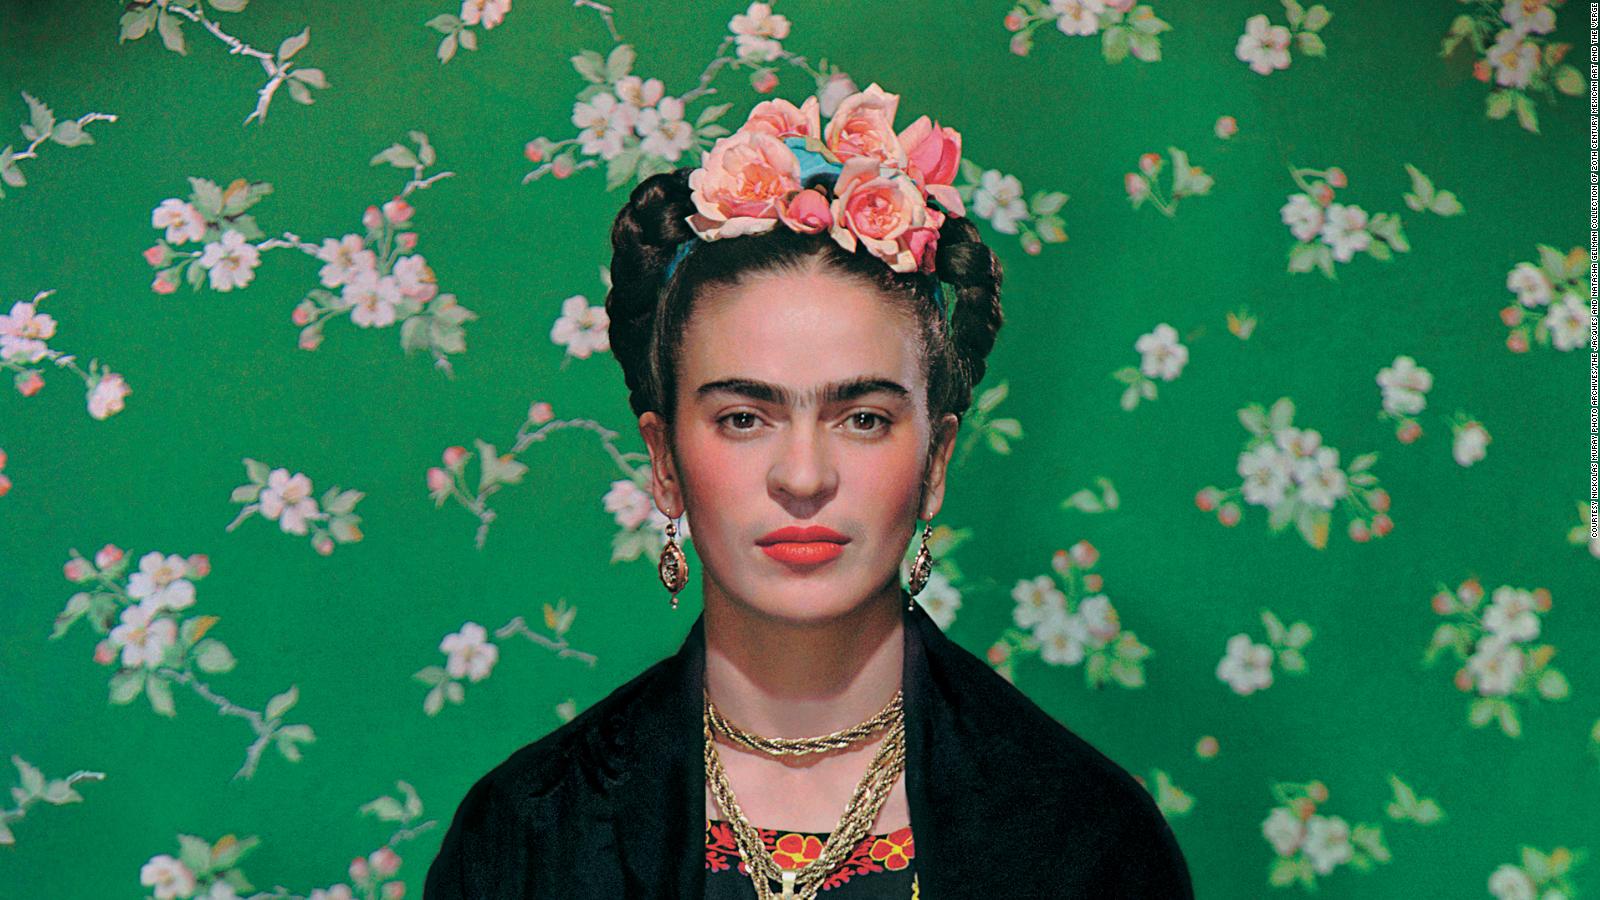 Frida Kahlo The Mexican Artist Who Used Fashion To Make A